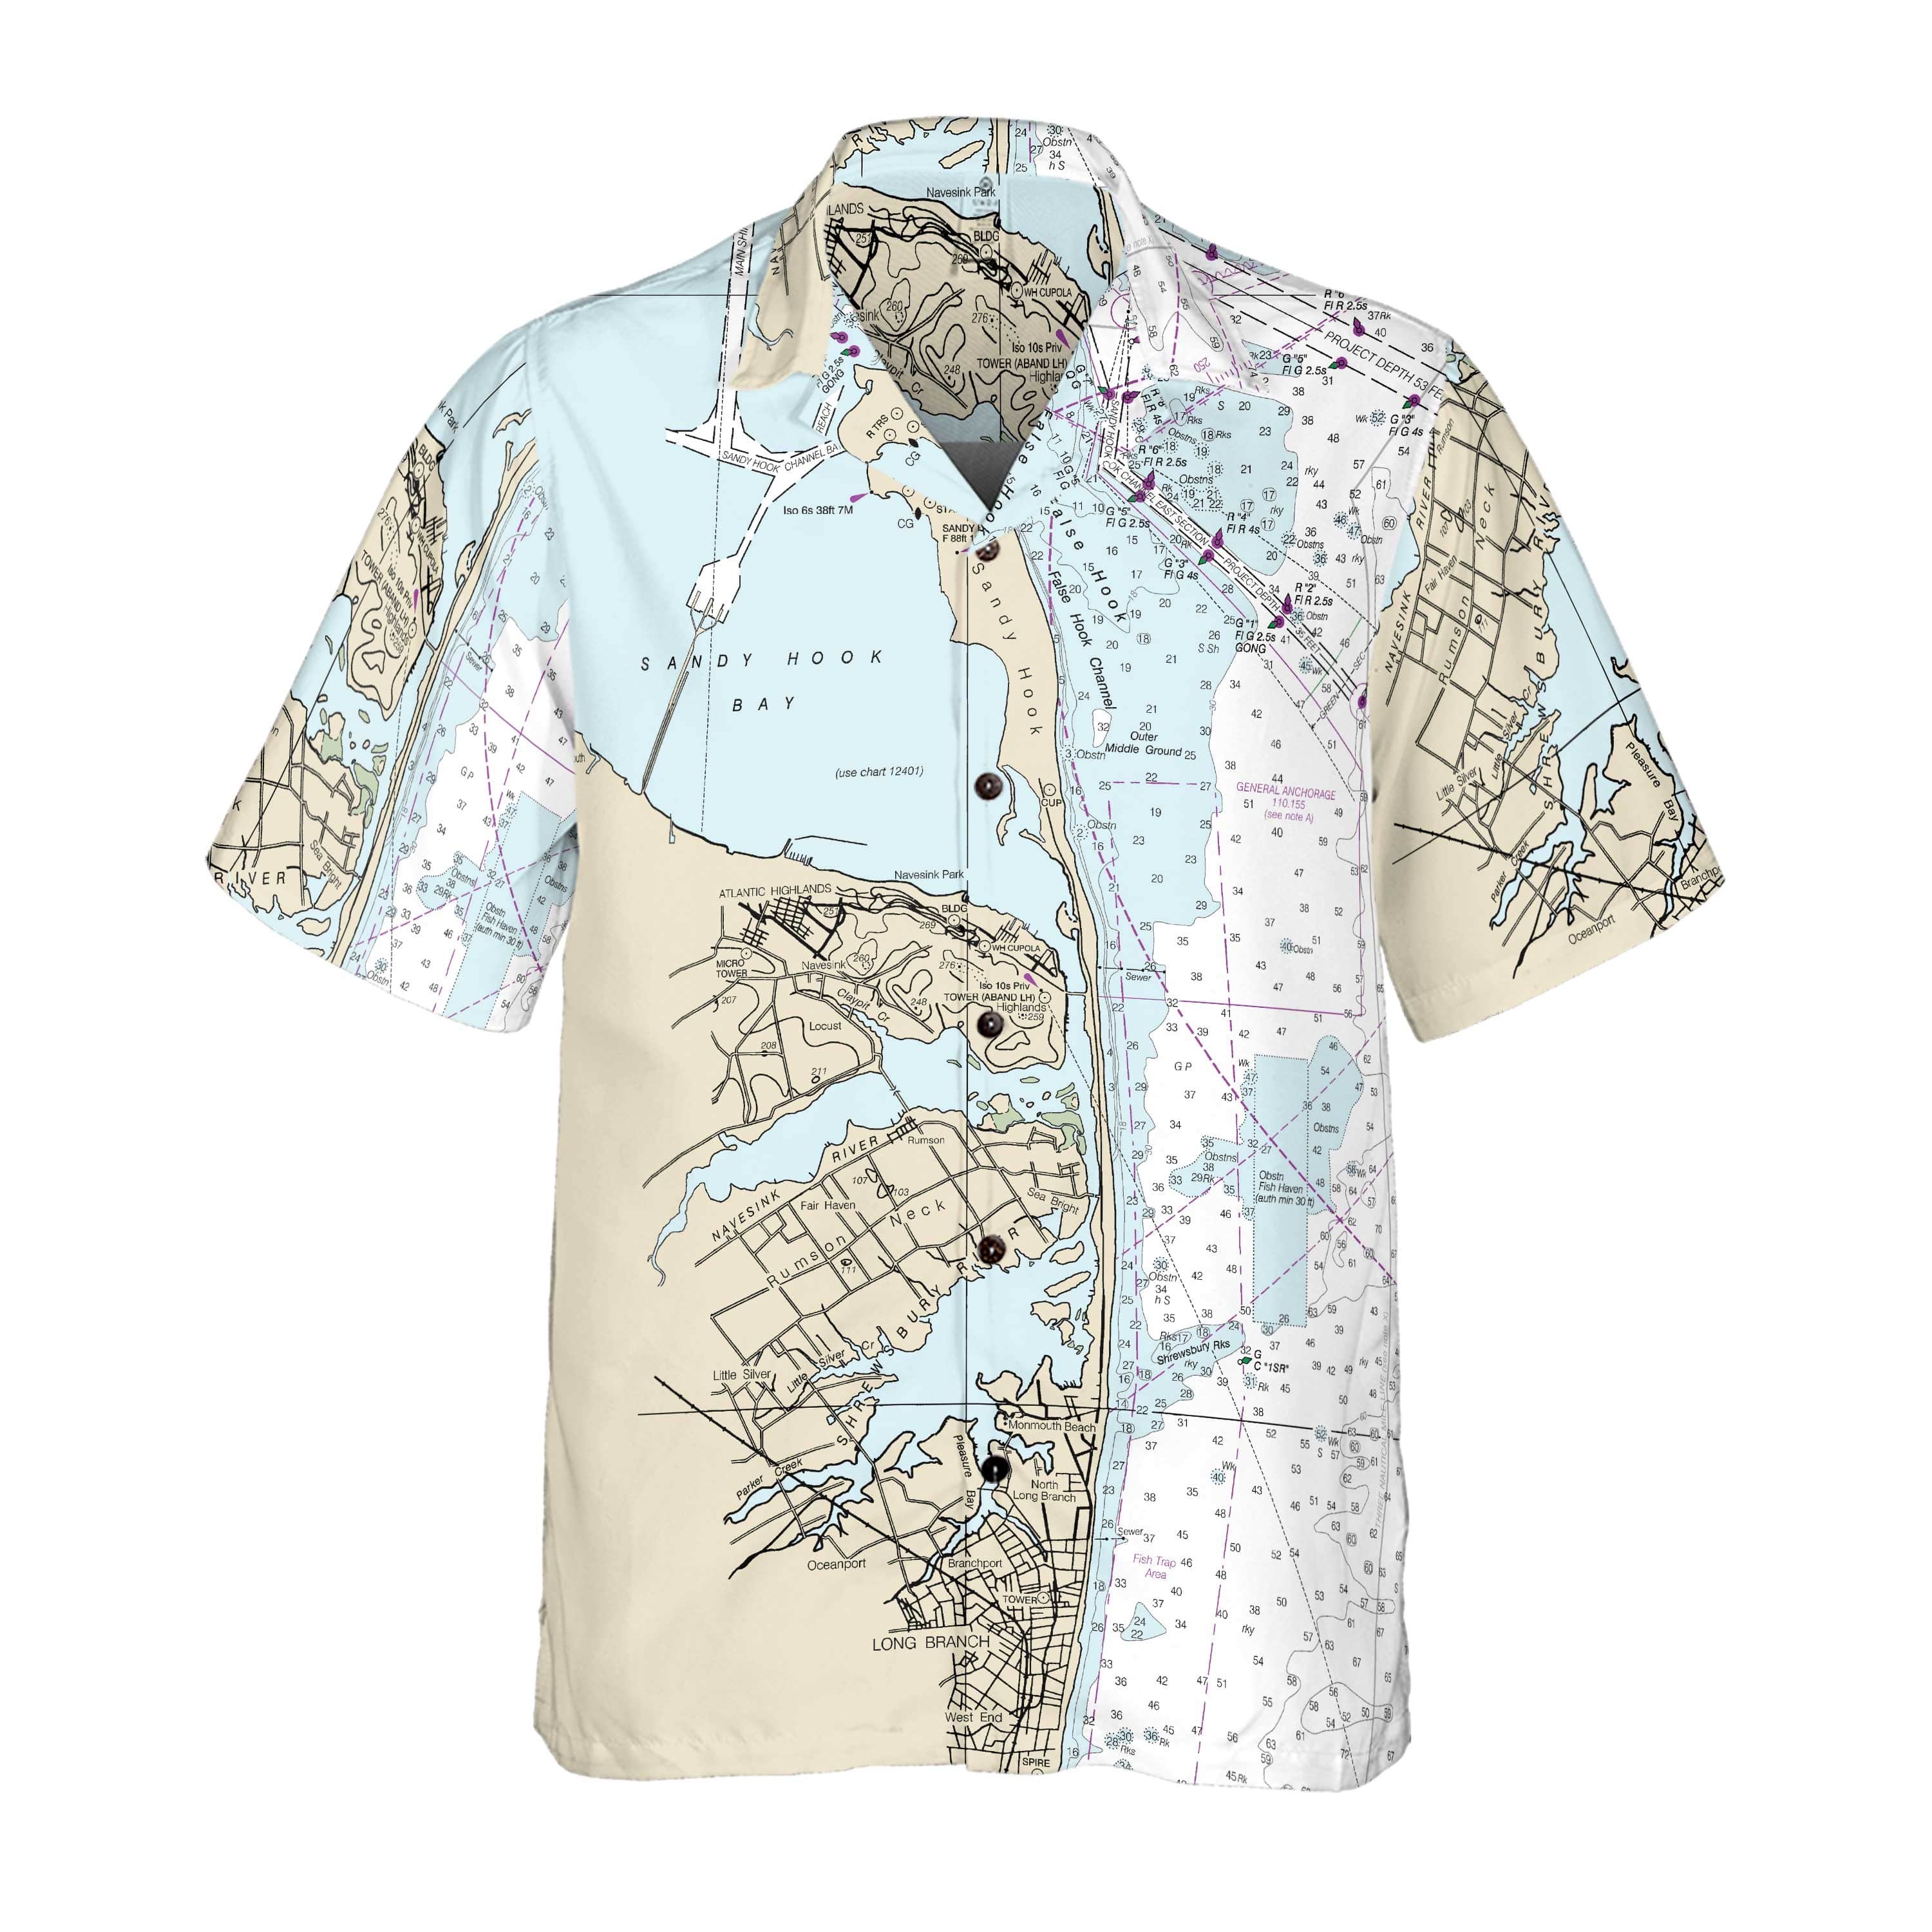 The Sandy Hook Bay Coconut Button Camp Shirt